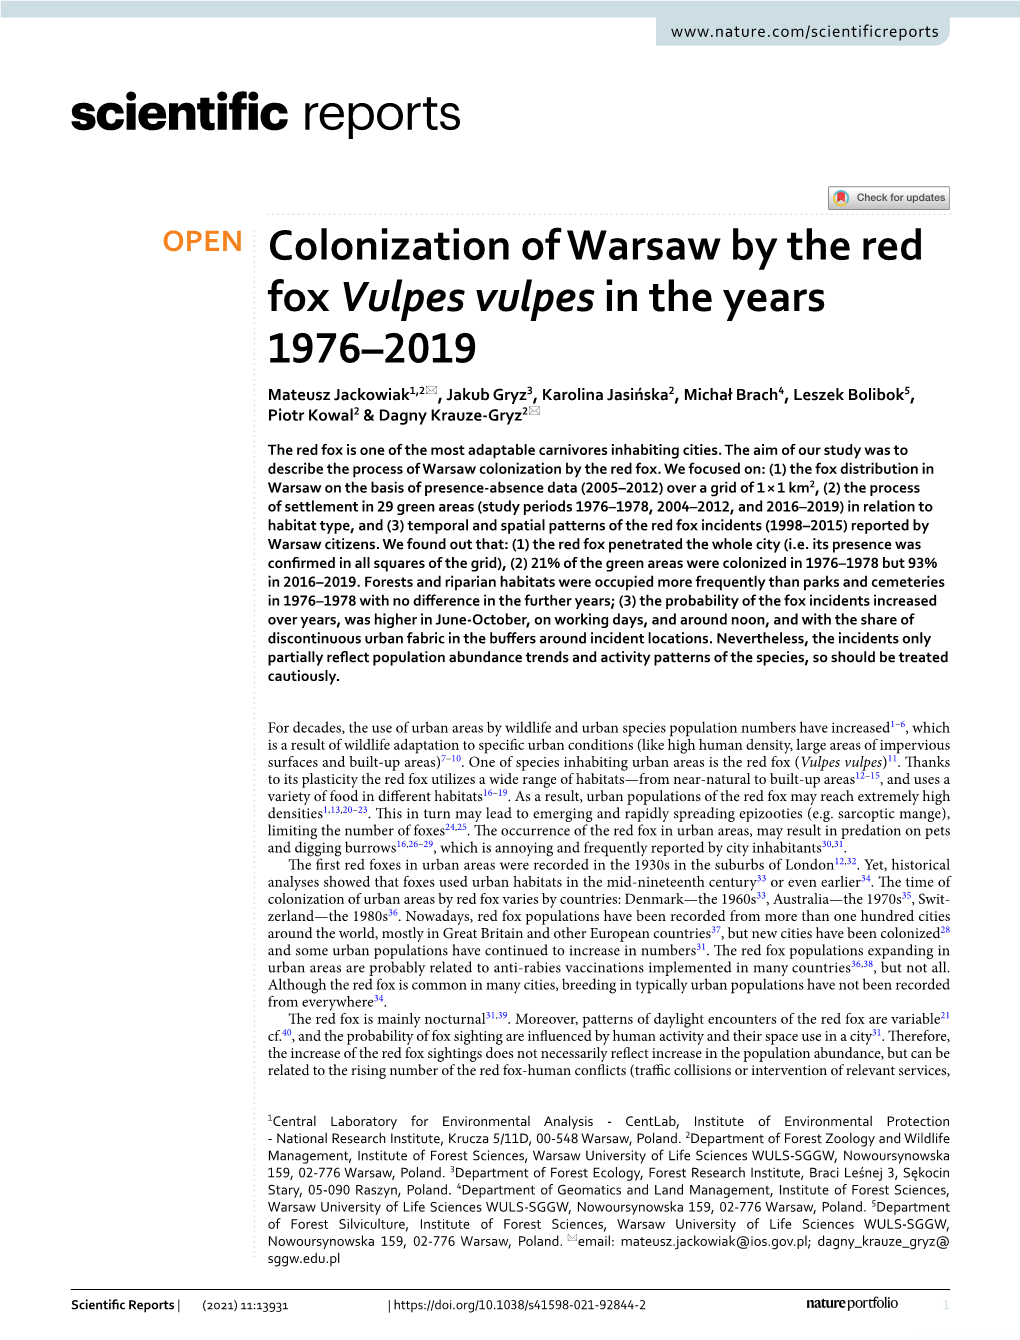 Colonization of Warsaw by the Red Fox Vulpes Vulpes in the Years 1976